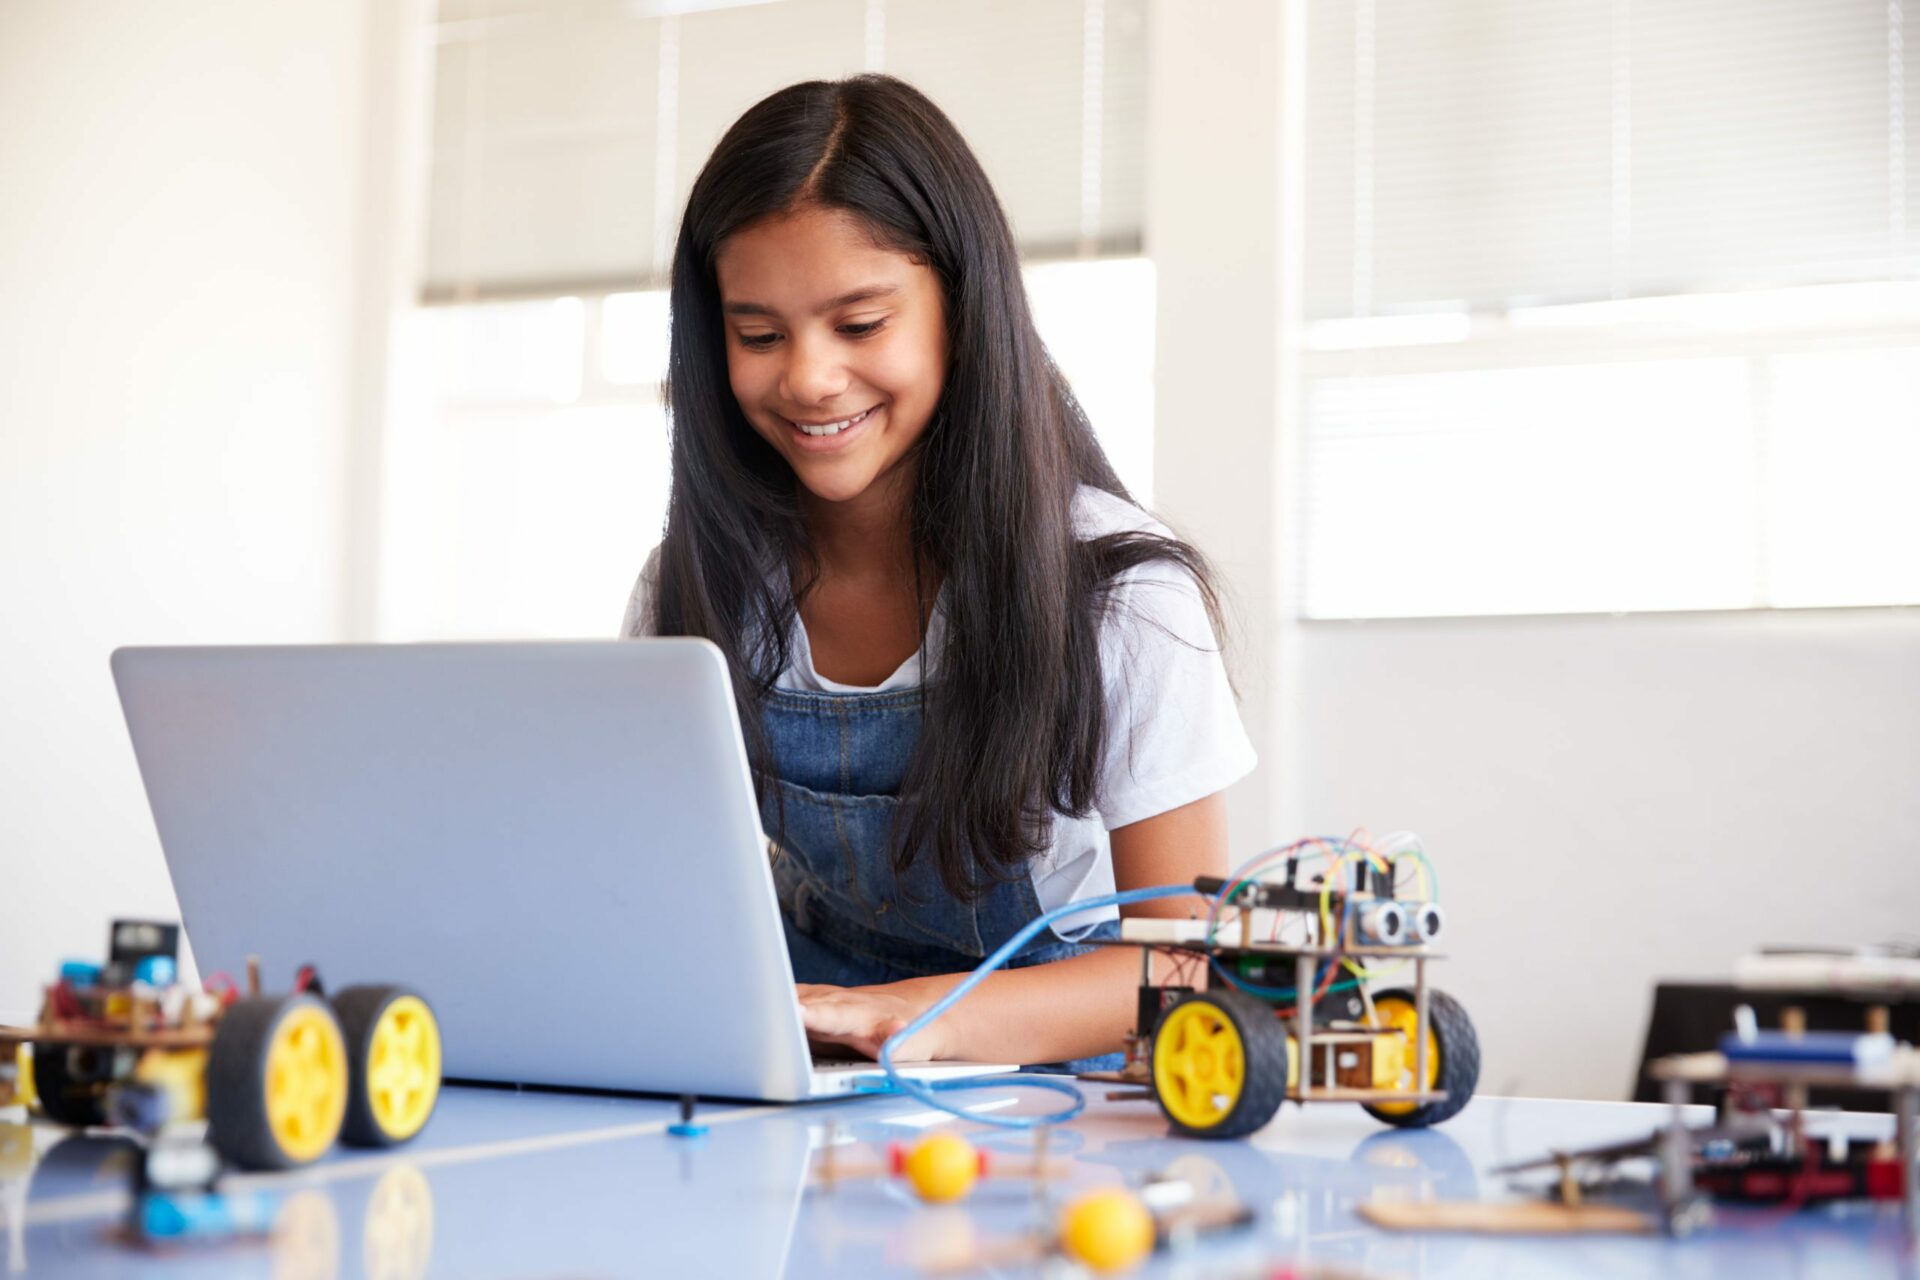 Image of a young girl looking at a computer with robotics equipment around her.